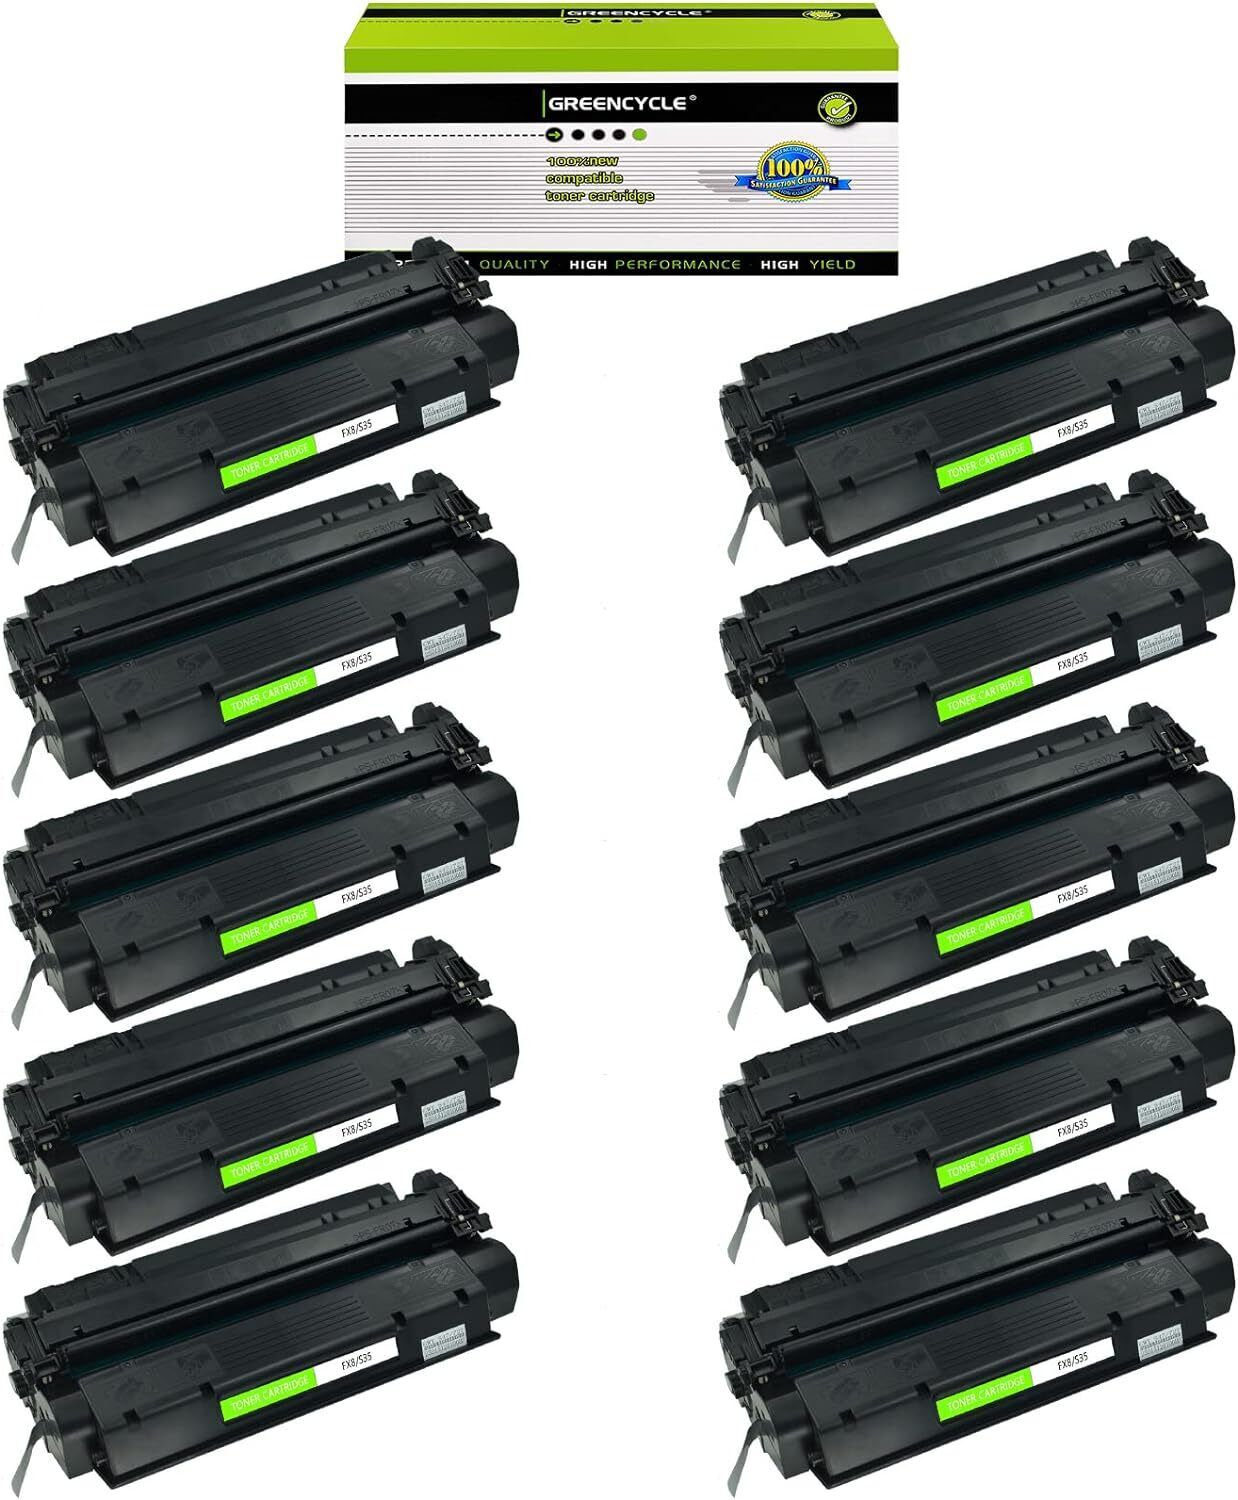 GREENCYCLE 10PK S35 S-35 Toner Cartridge Compatible for Canon Fax-L380 PC-D320